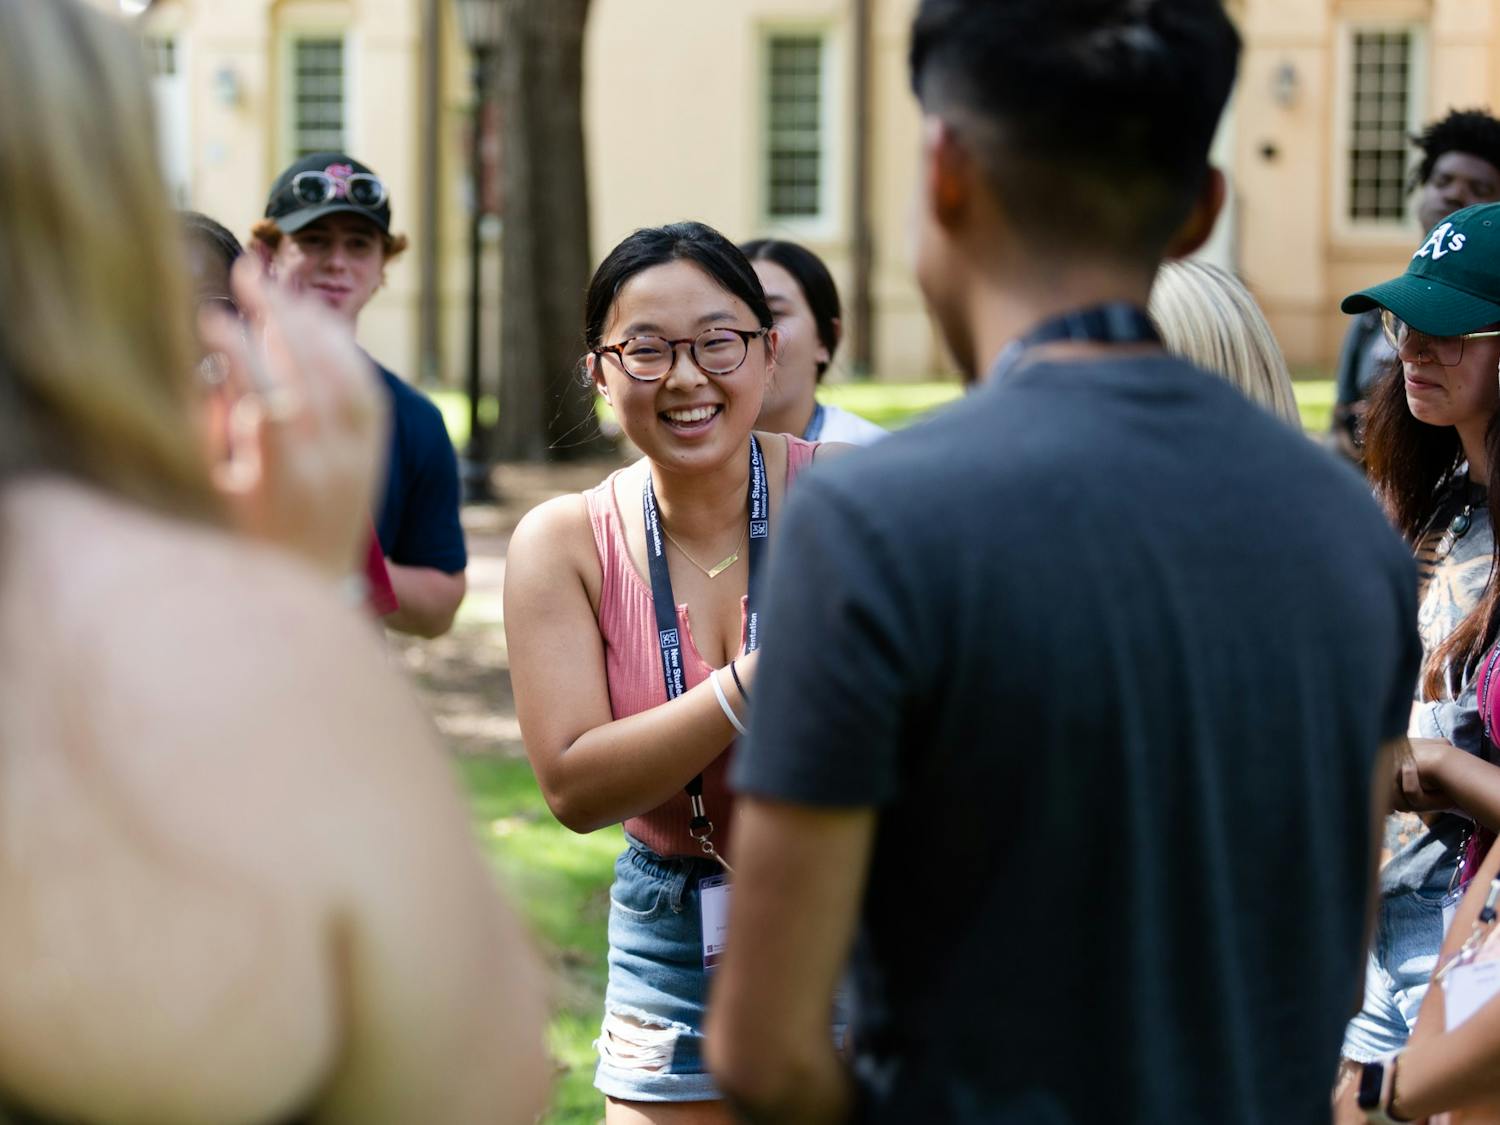 A first-year student laughs while playing a game of rock paper scissors on the horseshoe during an orientation session on July 20, 2022. Before starting their first semester at USC, freshmen students attend a two-day program to introduce them to campus and college life.&nbsp;